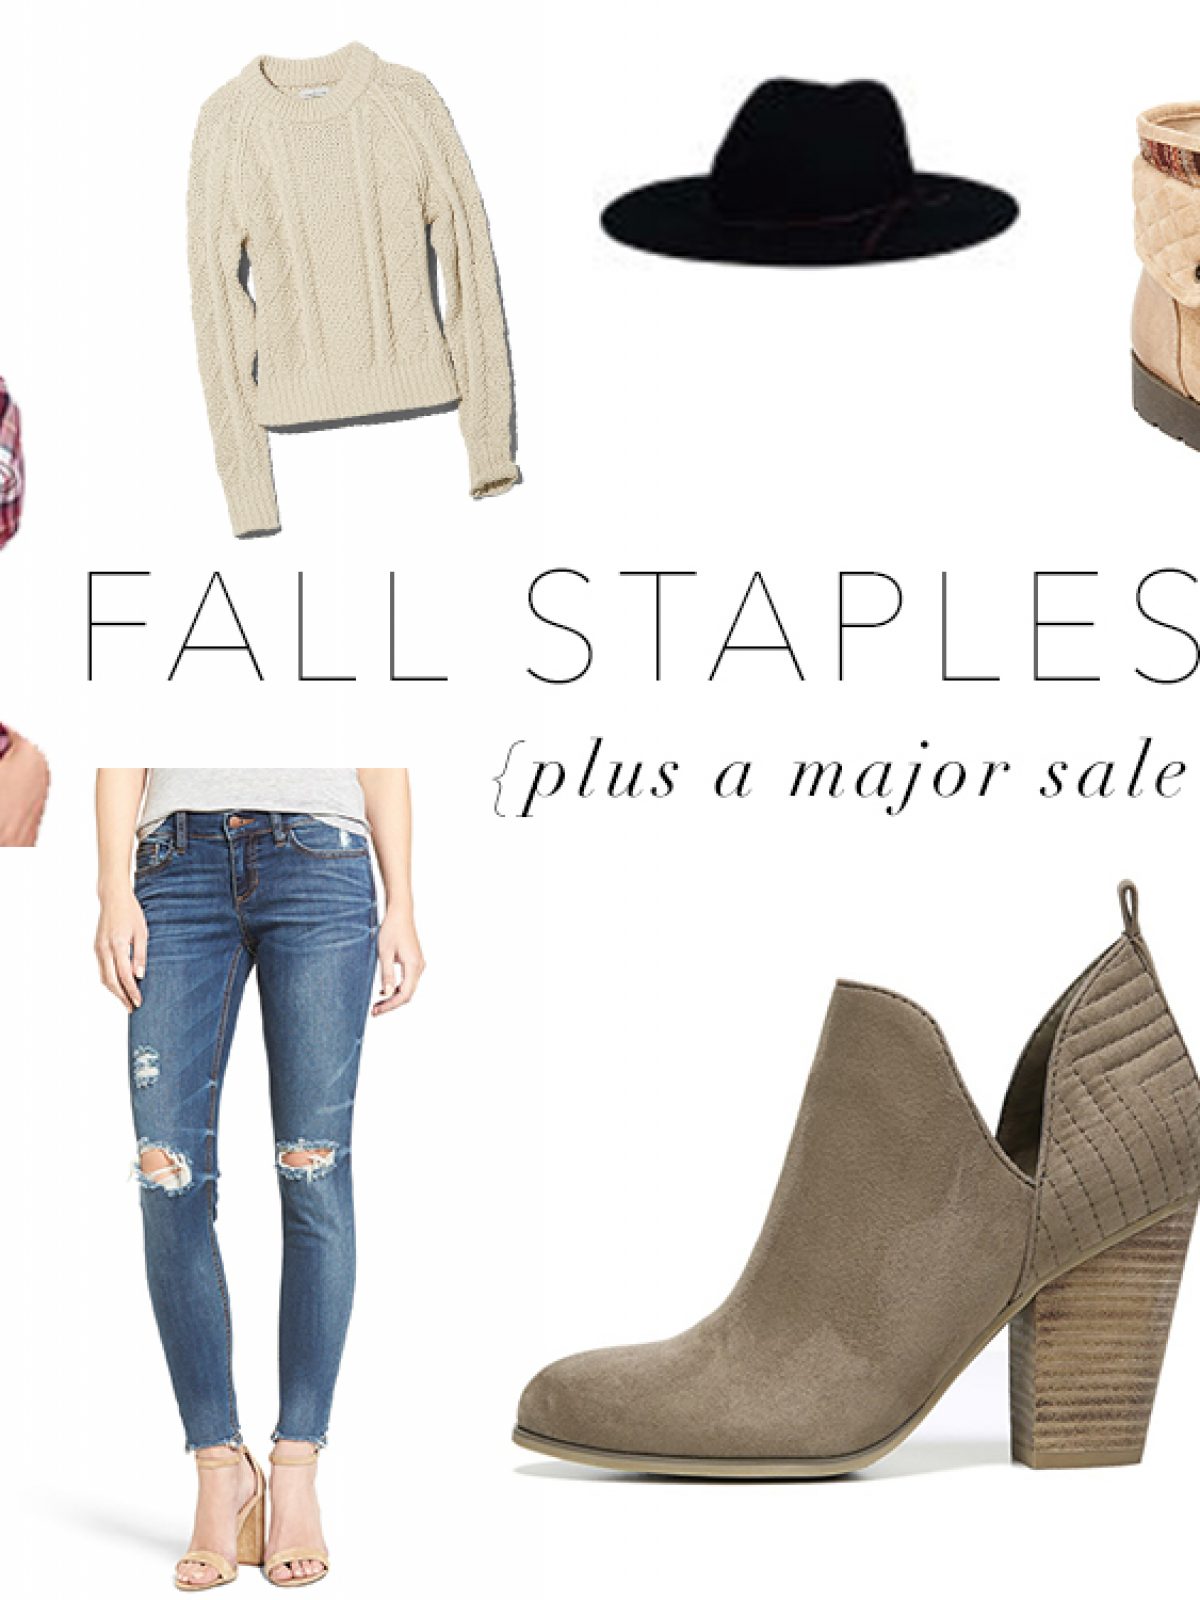 booties, classic trench, fall favoritesX fall must haves, fall staples, fall wardrobe staplesX leather jacket, over the knee boots, white button down